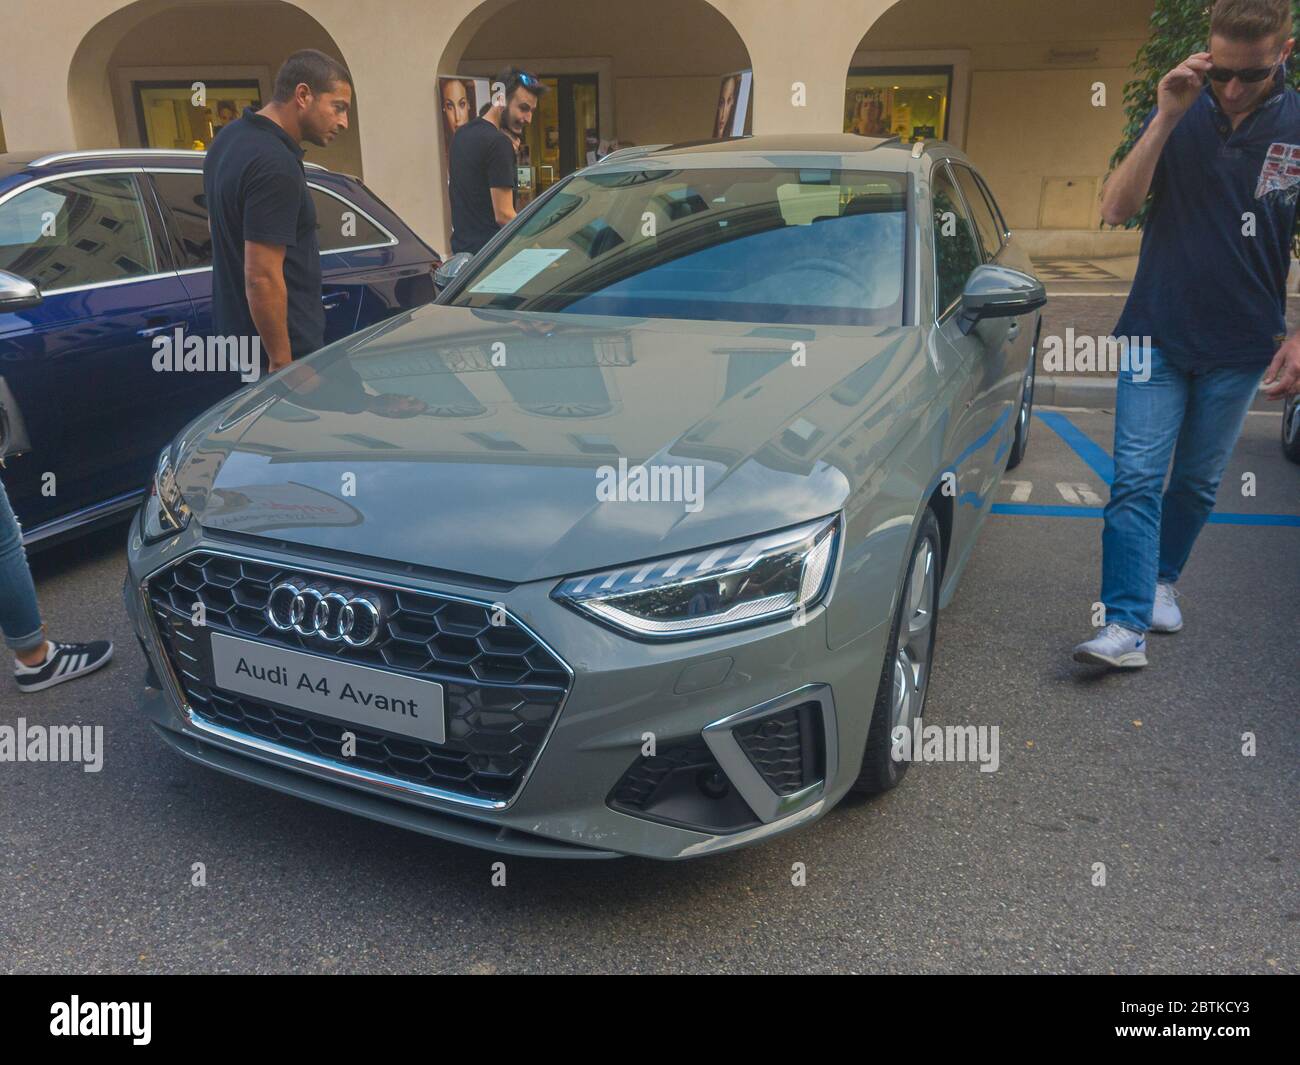 CONEGLIANO, ITALY - SEPTEMBER 14, 2019: Audi A4 Avant model. This car is exhibited as part of the autumn car expo Stock Photo